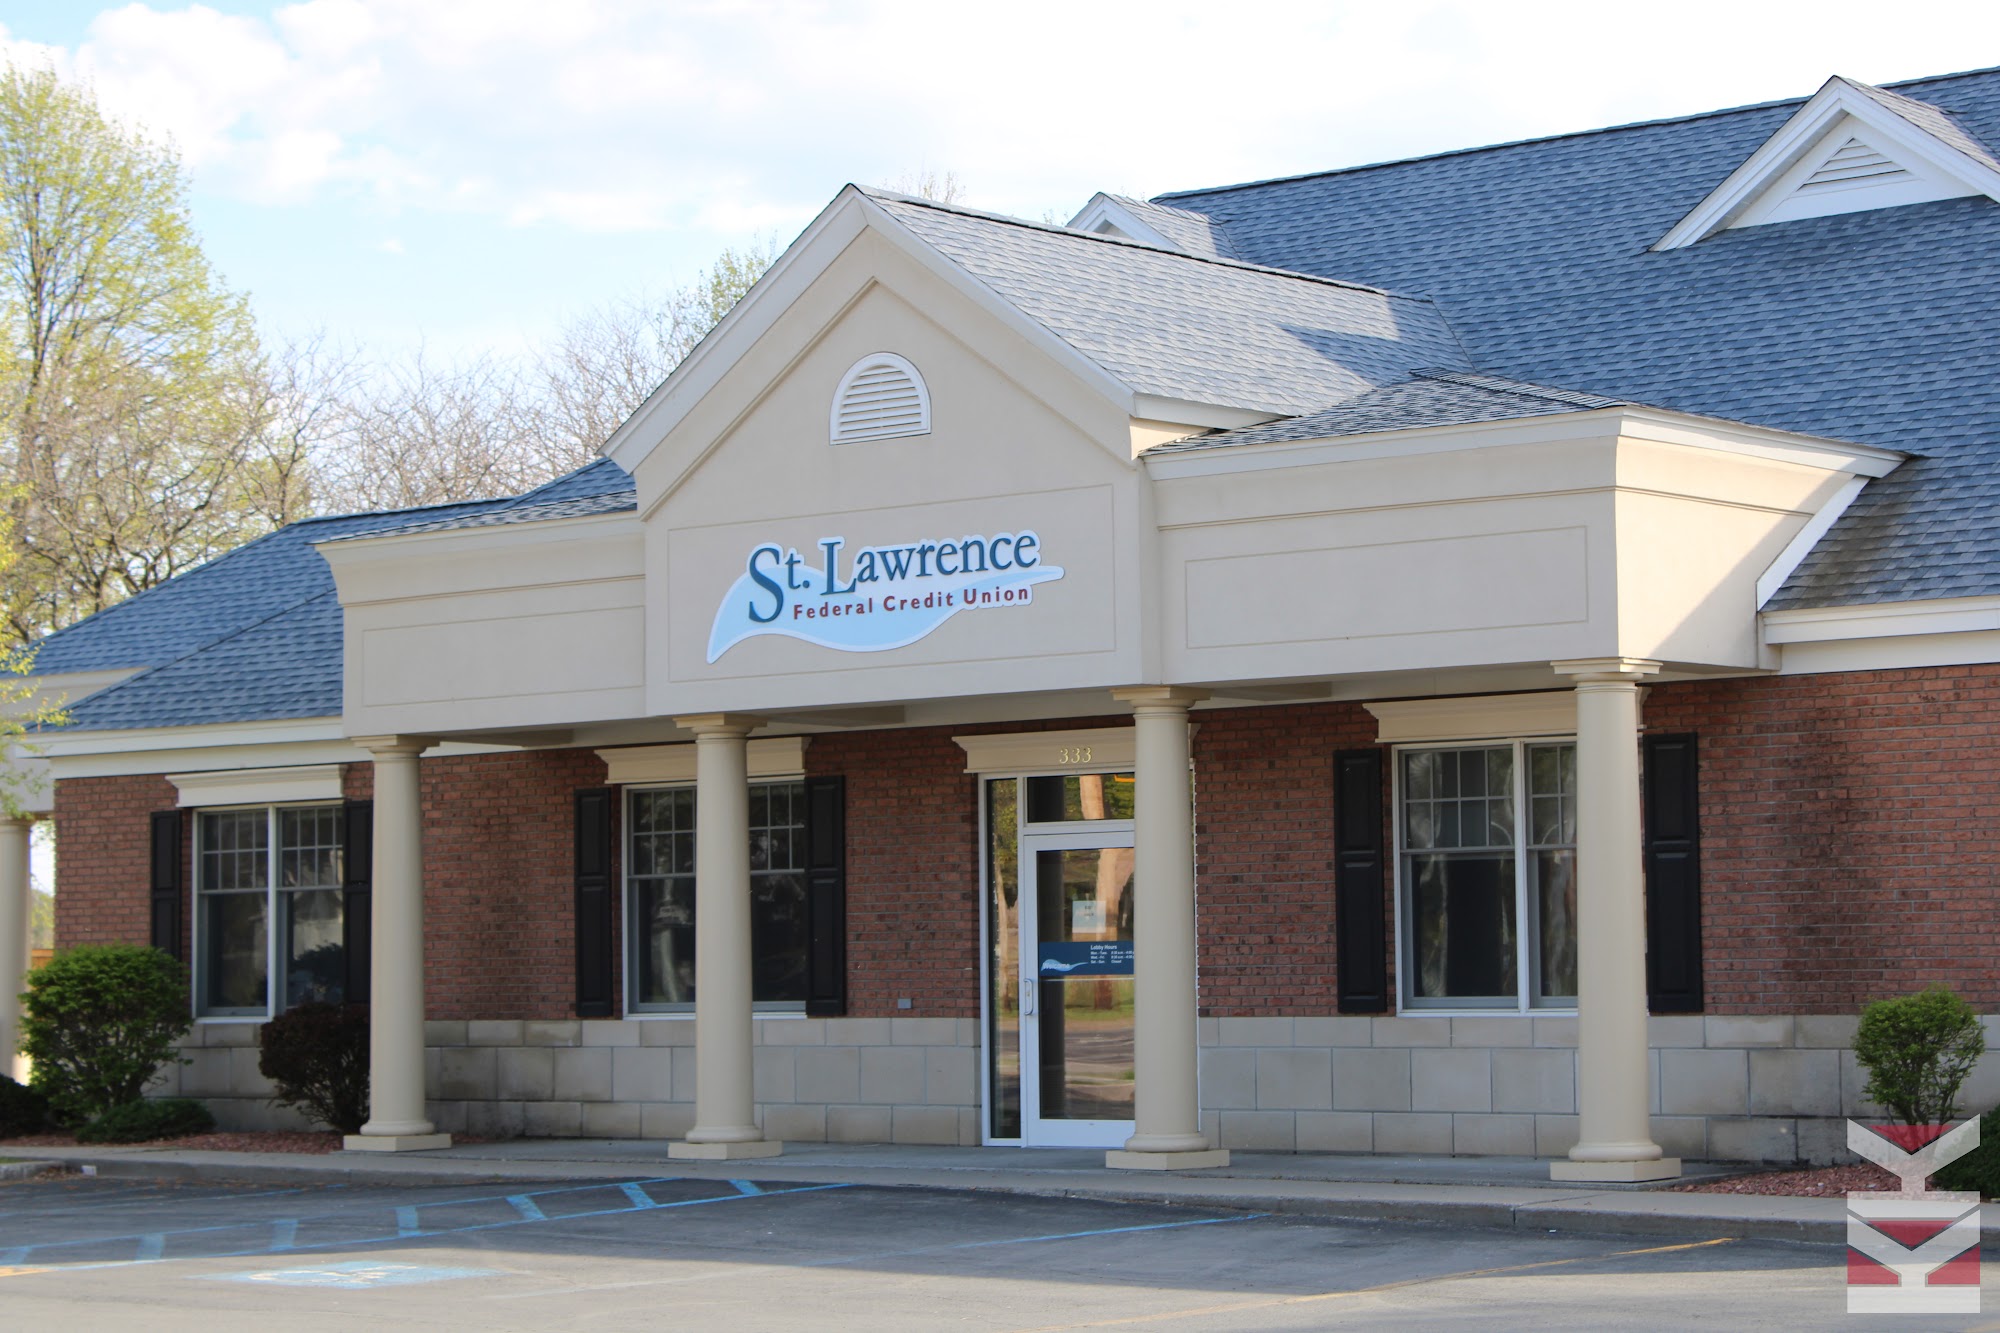 St. Lawrence Federal Credit Union